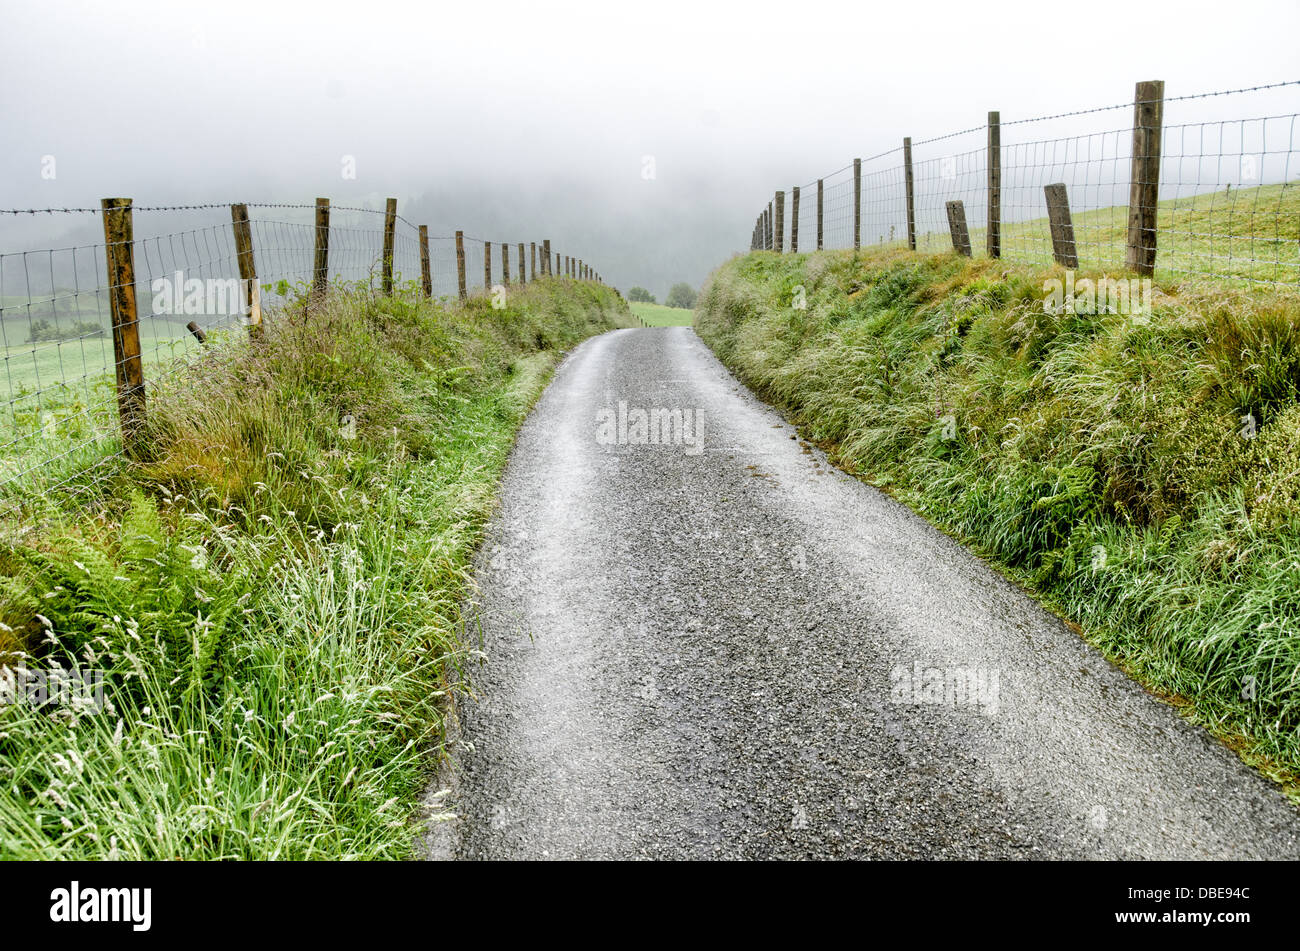 SNOWDONIA NATIONAL PARK, Wales - A small country lane running through the farms on top of a misty plateau in Snowdonia, Wales. Stock Photo